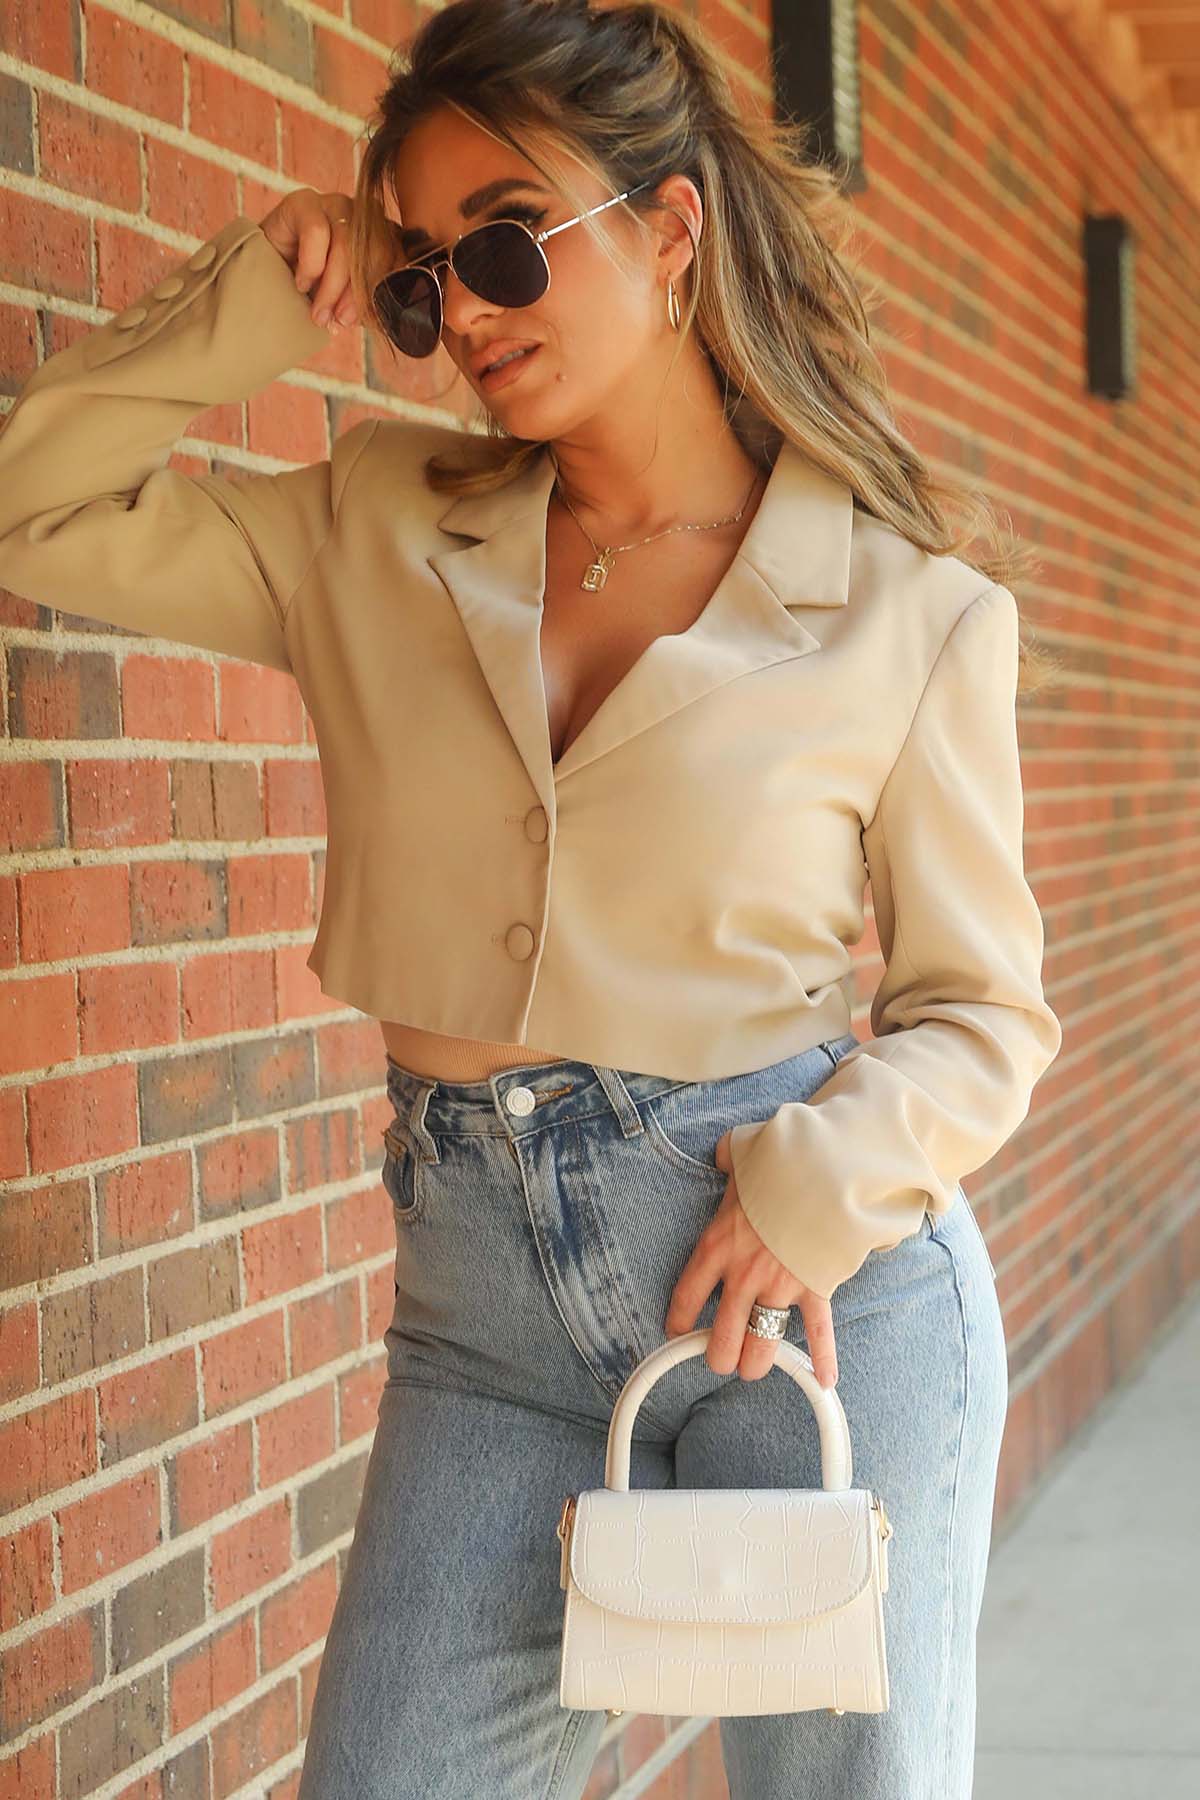 Oversized Button Down Outfit for Spring - Modnitsa Styling